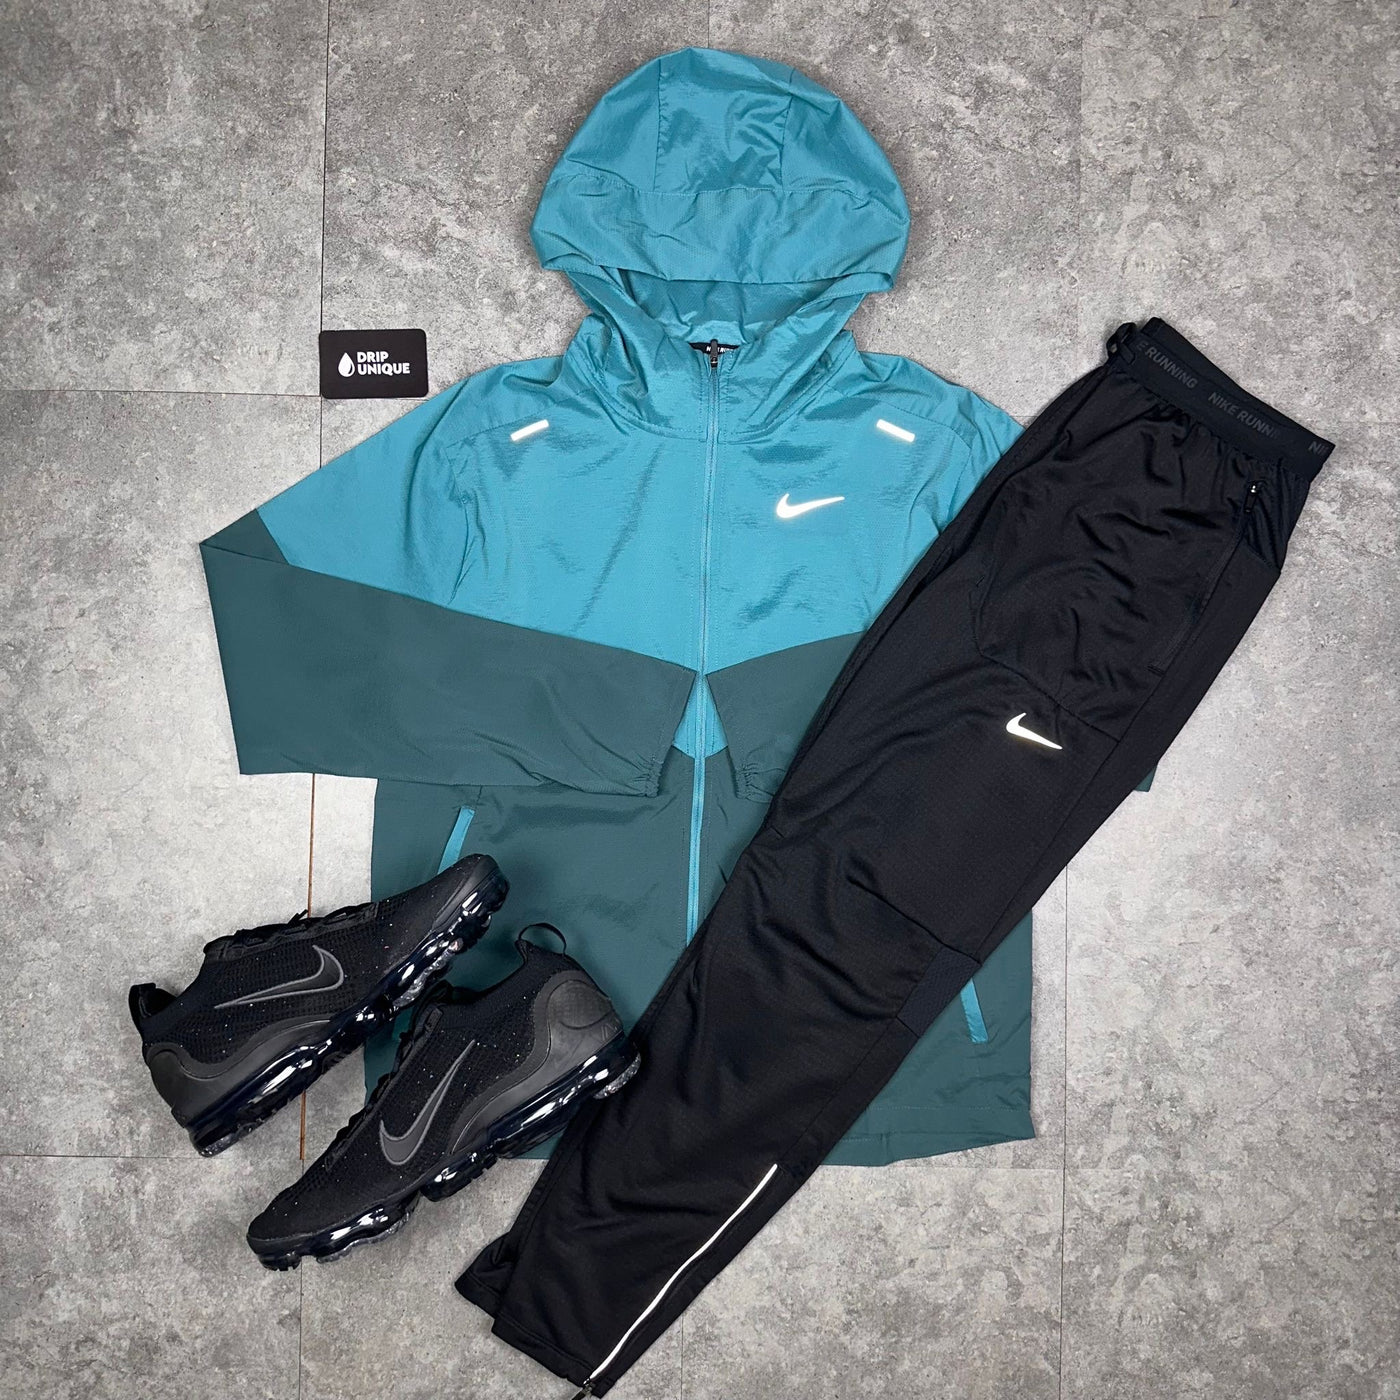 Men's Nike UV Windrunner Jacket in a Teal Colorway paired with the Nike Phenom Pants in a black colorway and the Nike Vapormax in Black, dripuniqueuk